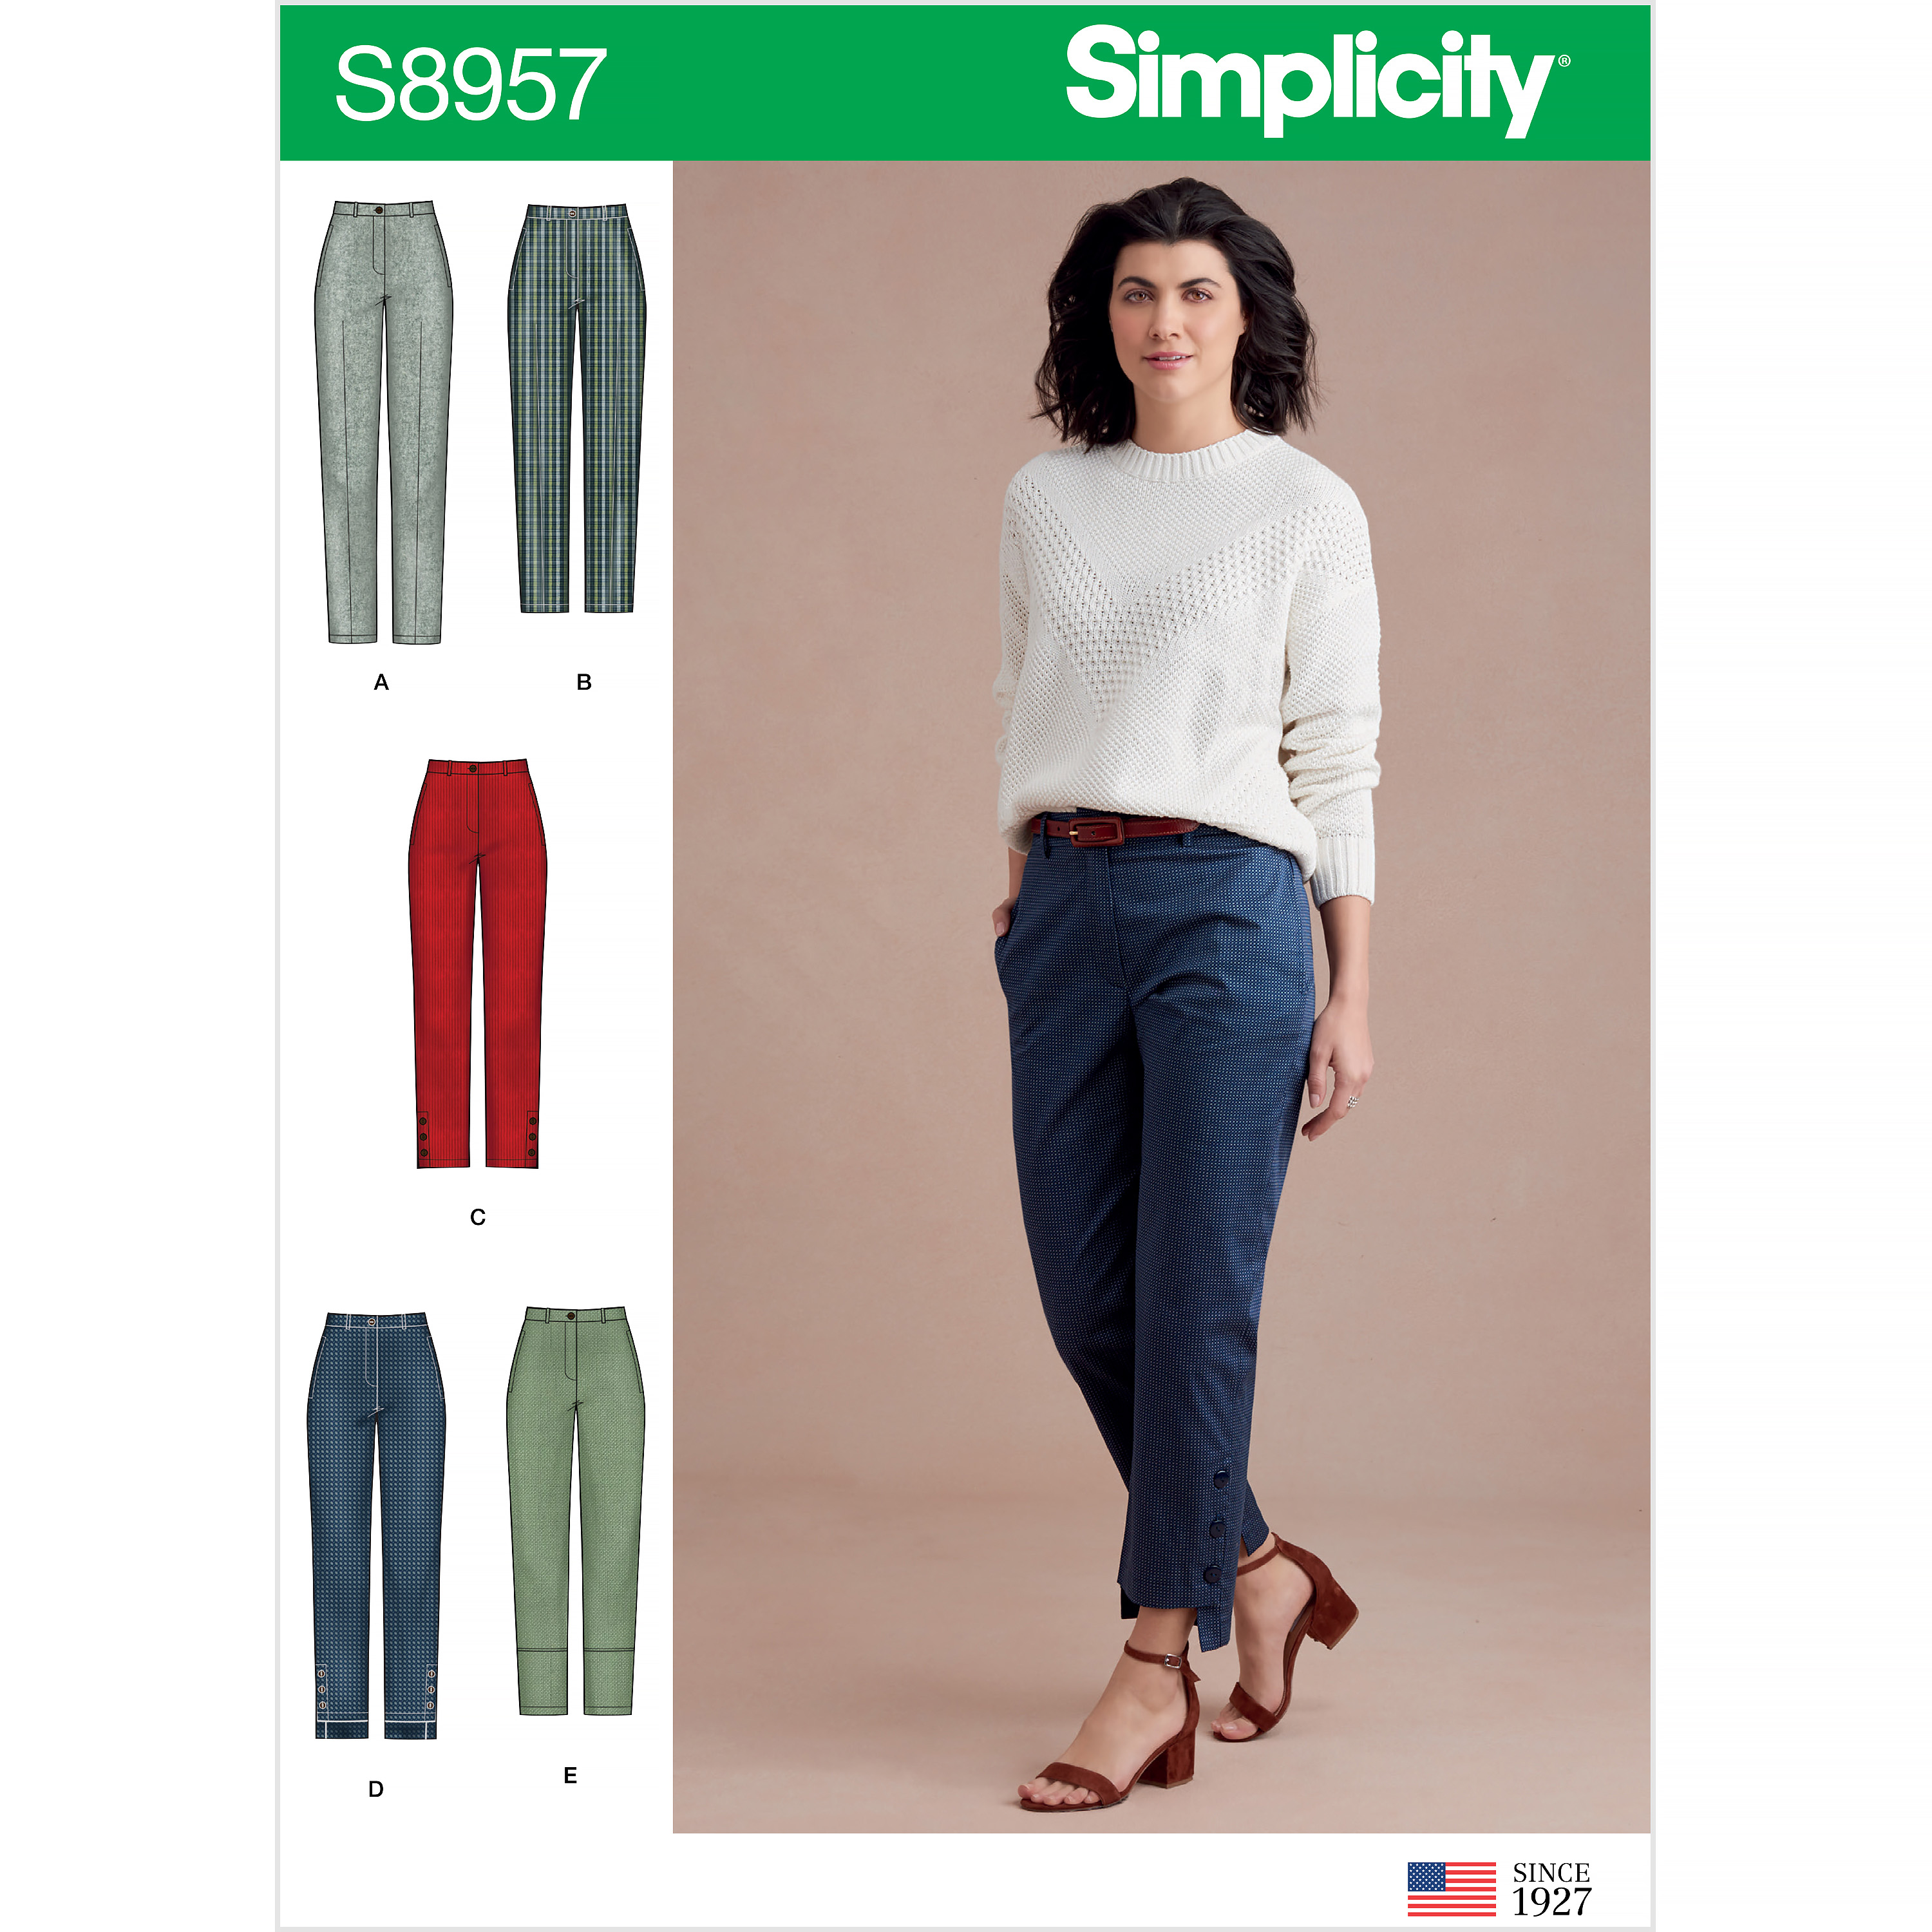 Simplicity 9715 High Waisted, Wide-leg Pants Sewing Pattern for